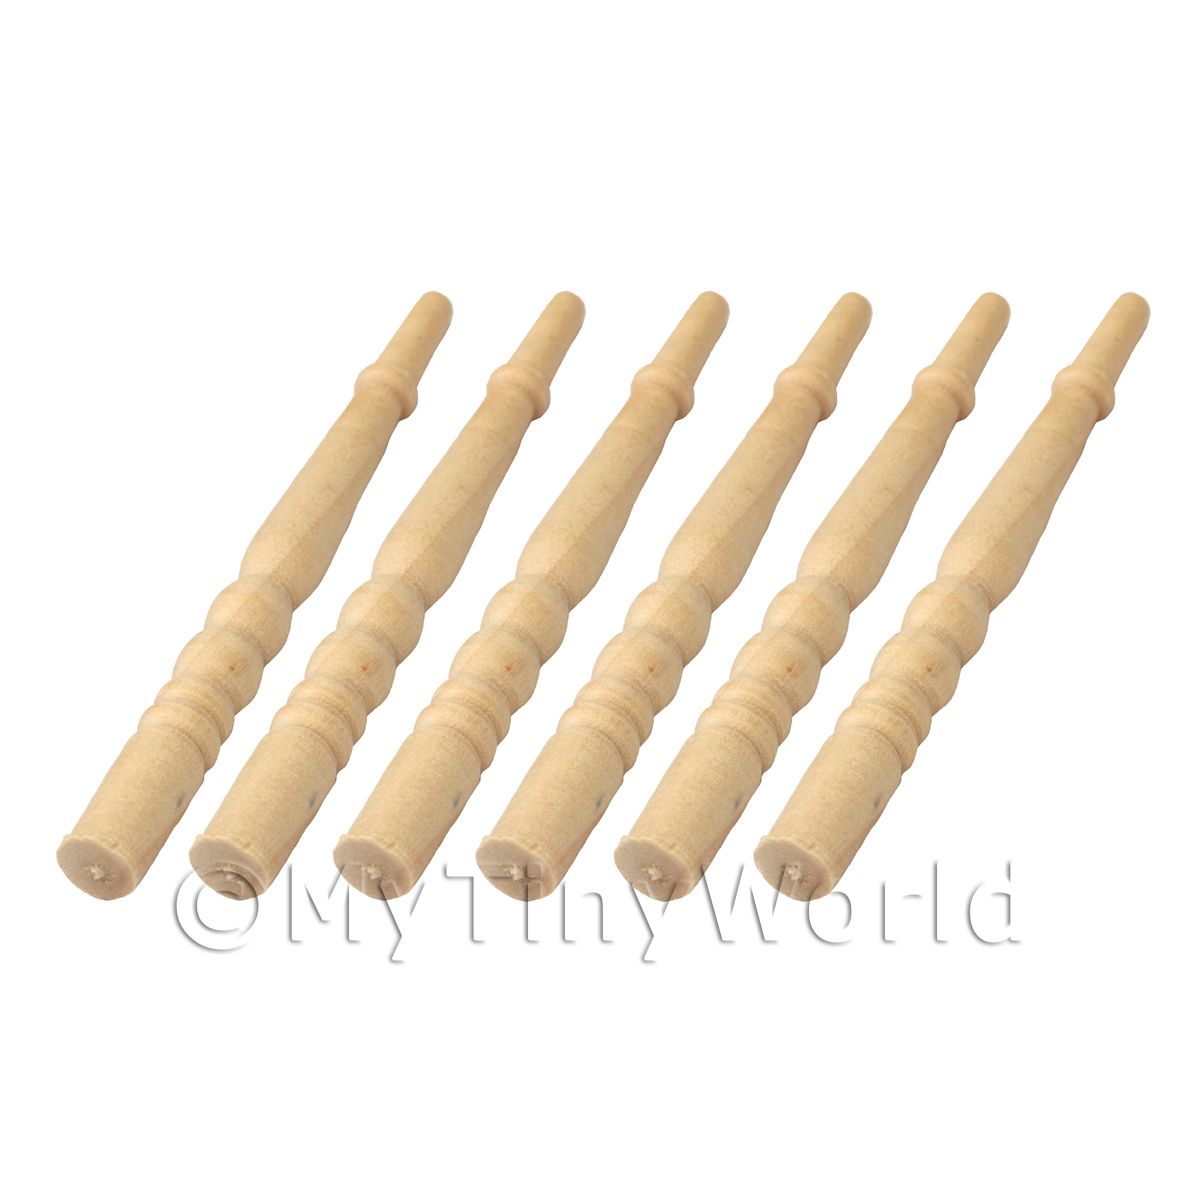 style 5 6 X Dolls House Miniature Rounded Long Wood Spindles